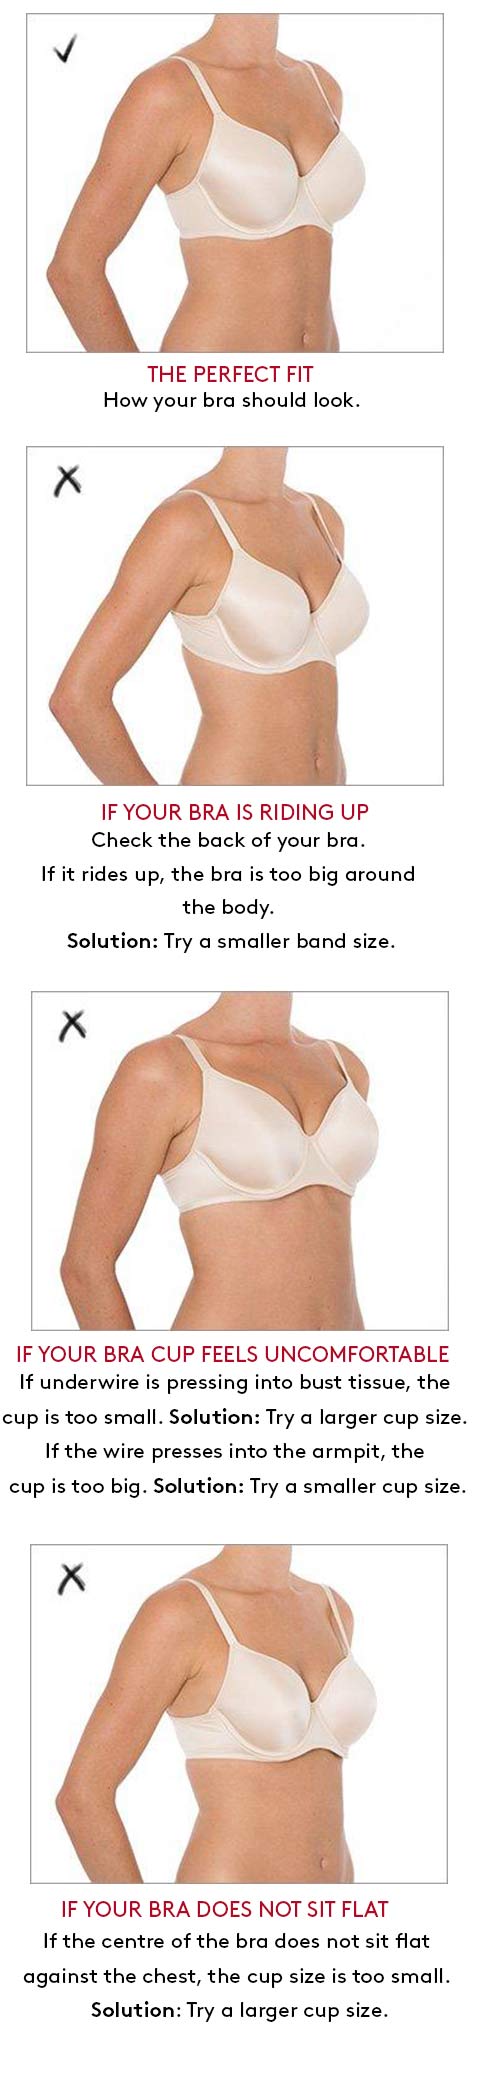 How to check your bra is fitting correctly